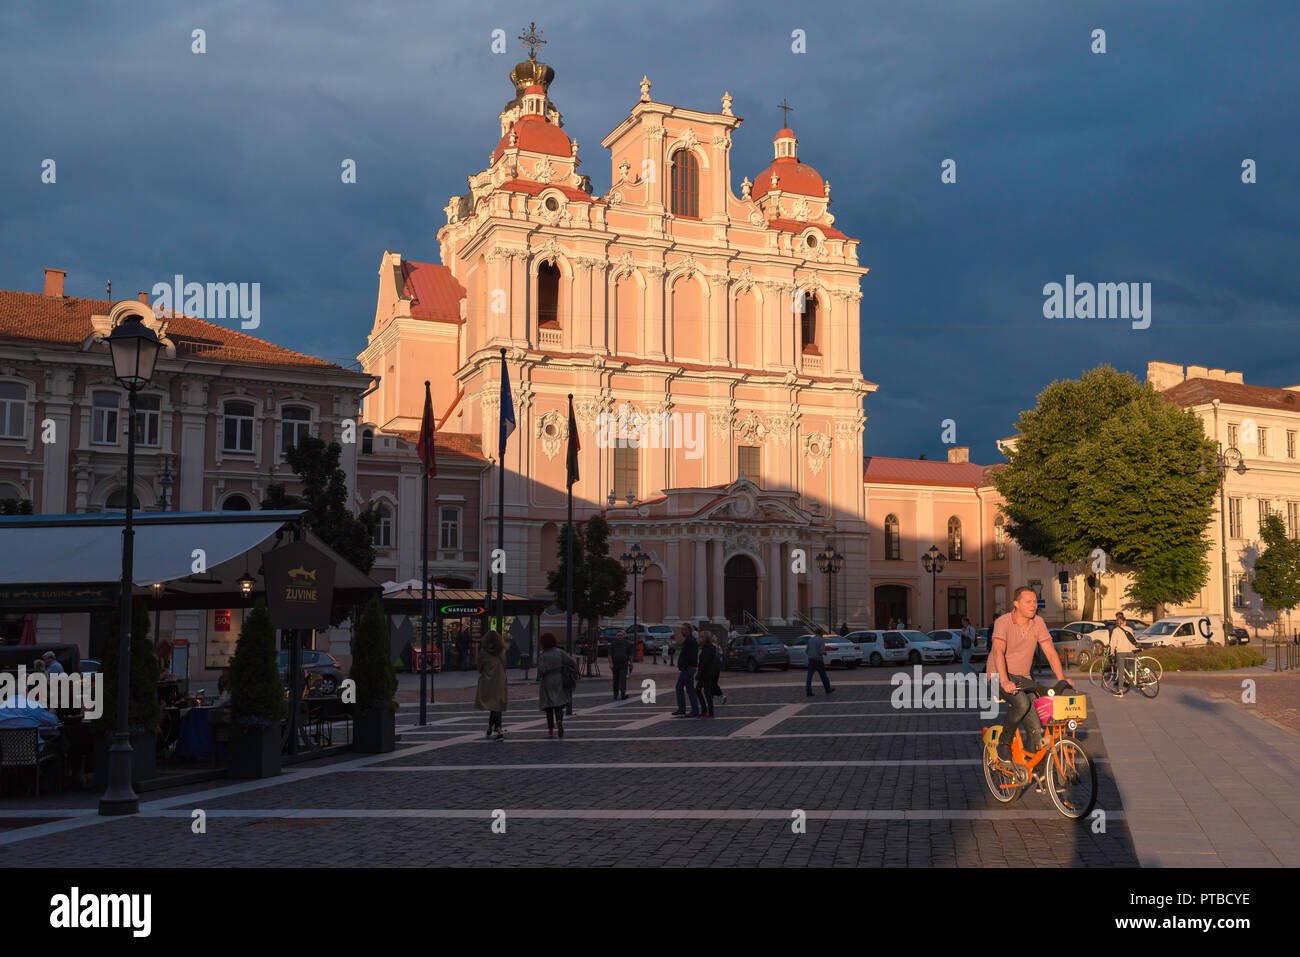 Vilnius Old Town, view at sunset of the Baroque facade of St Casimir's Church in Town Hall Square in Vilnius Old Town, Lithuania. Stock Photo